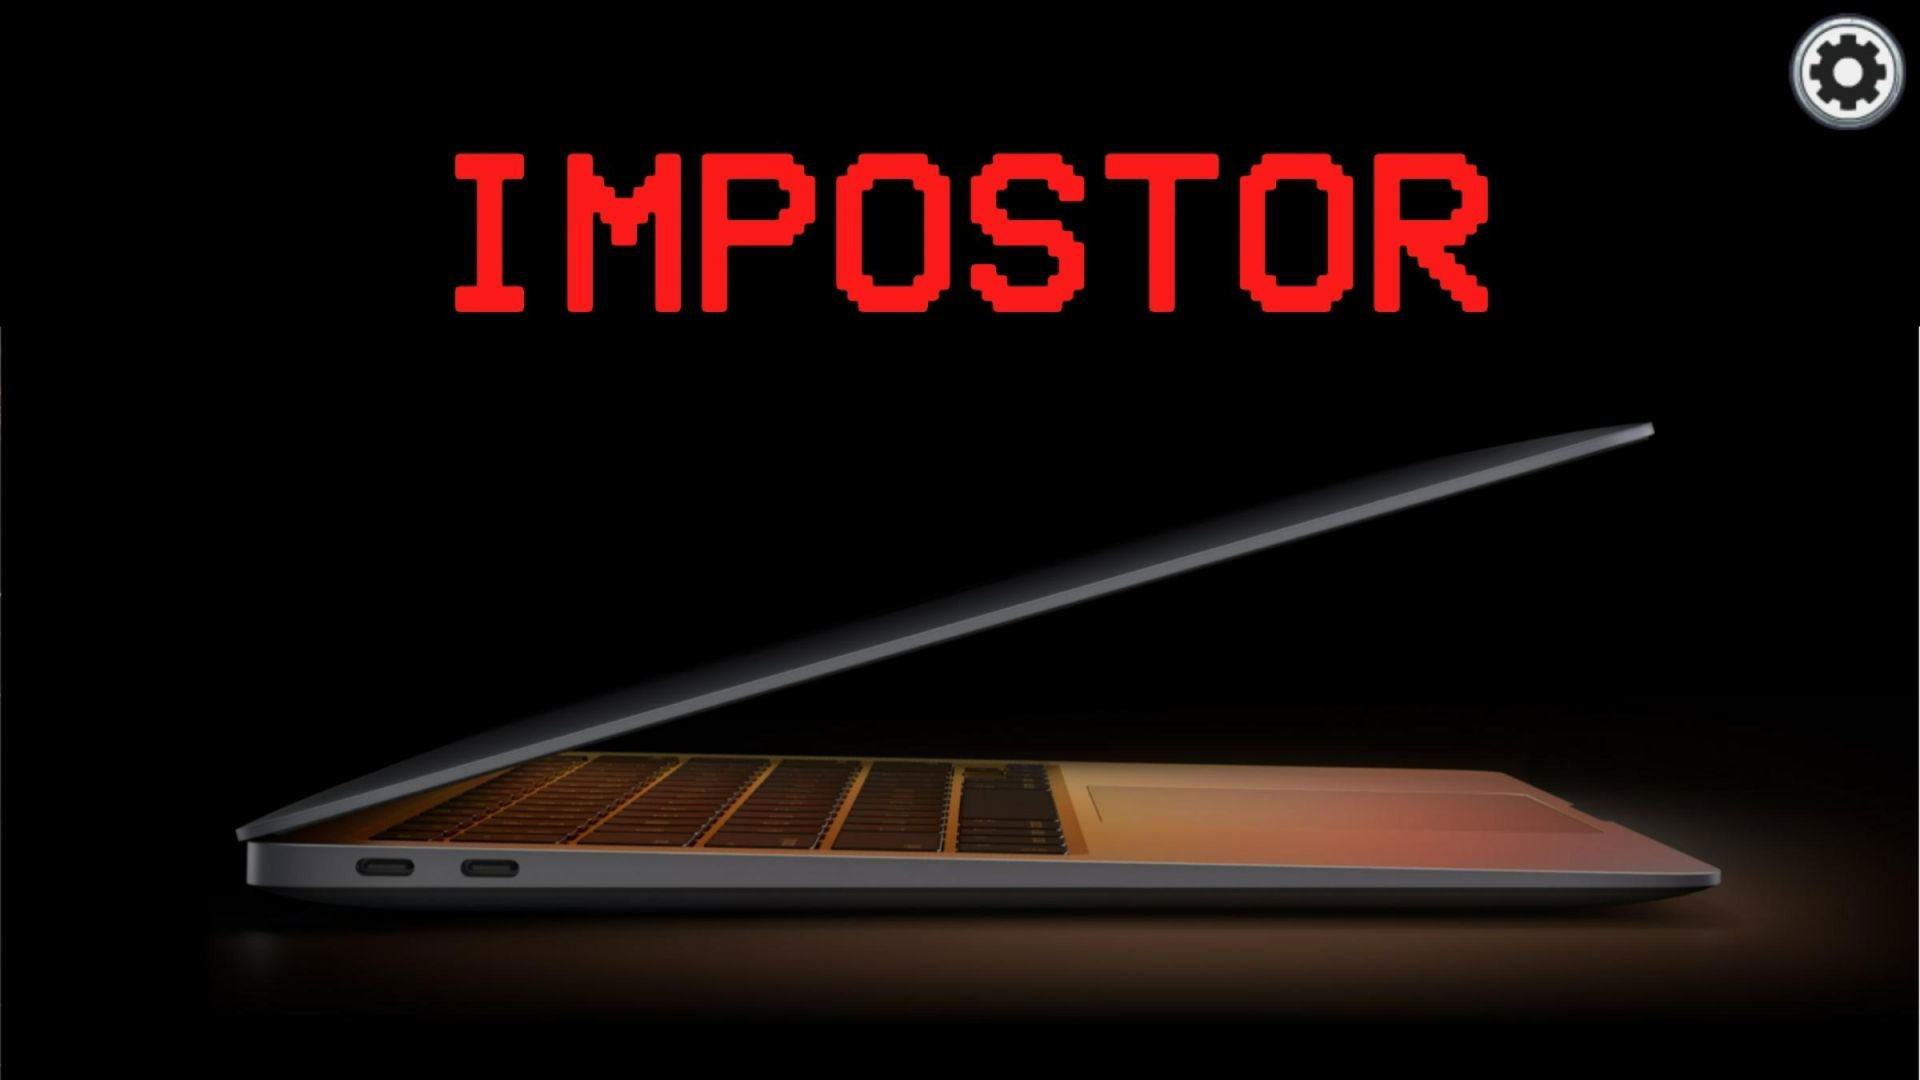 The M1 MacBook Prime Day impostor deal is still at large, don't get caught!